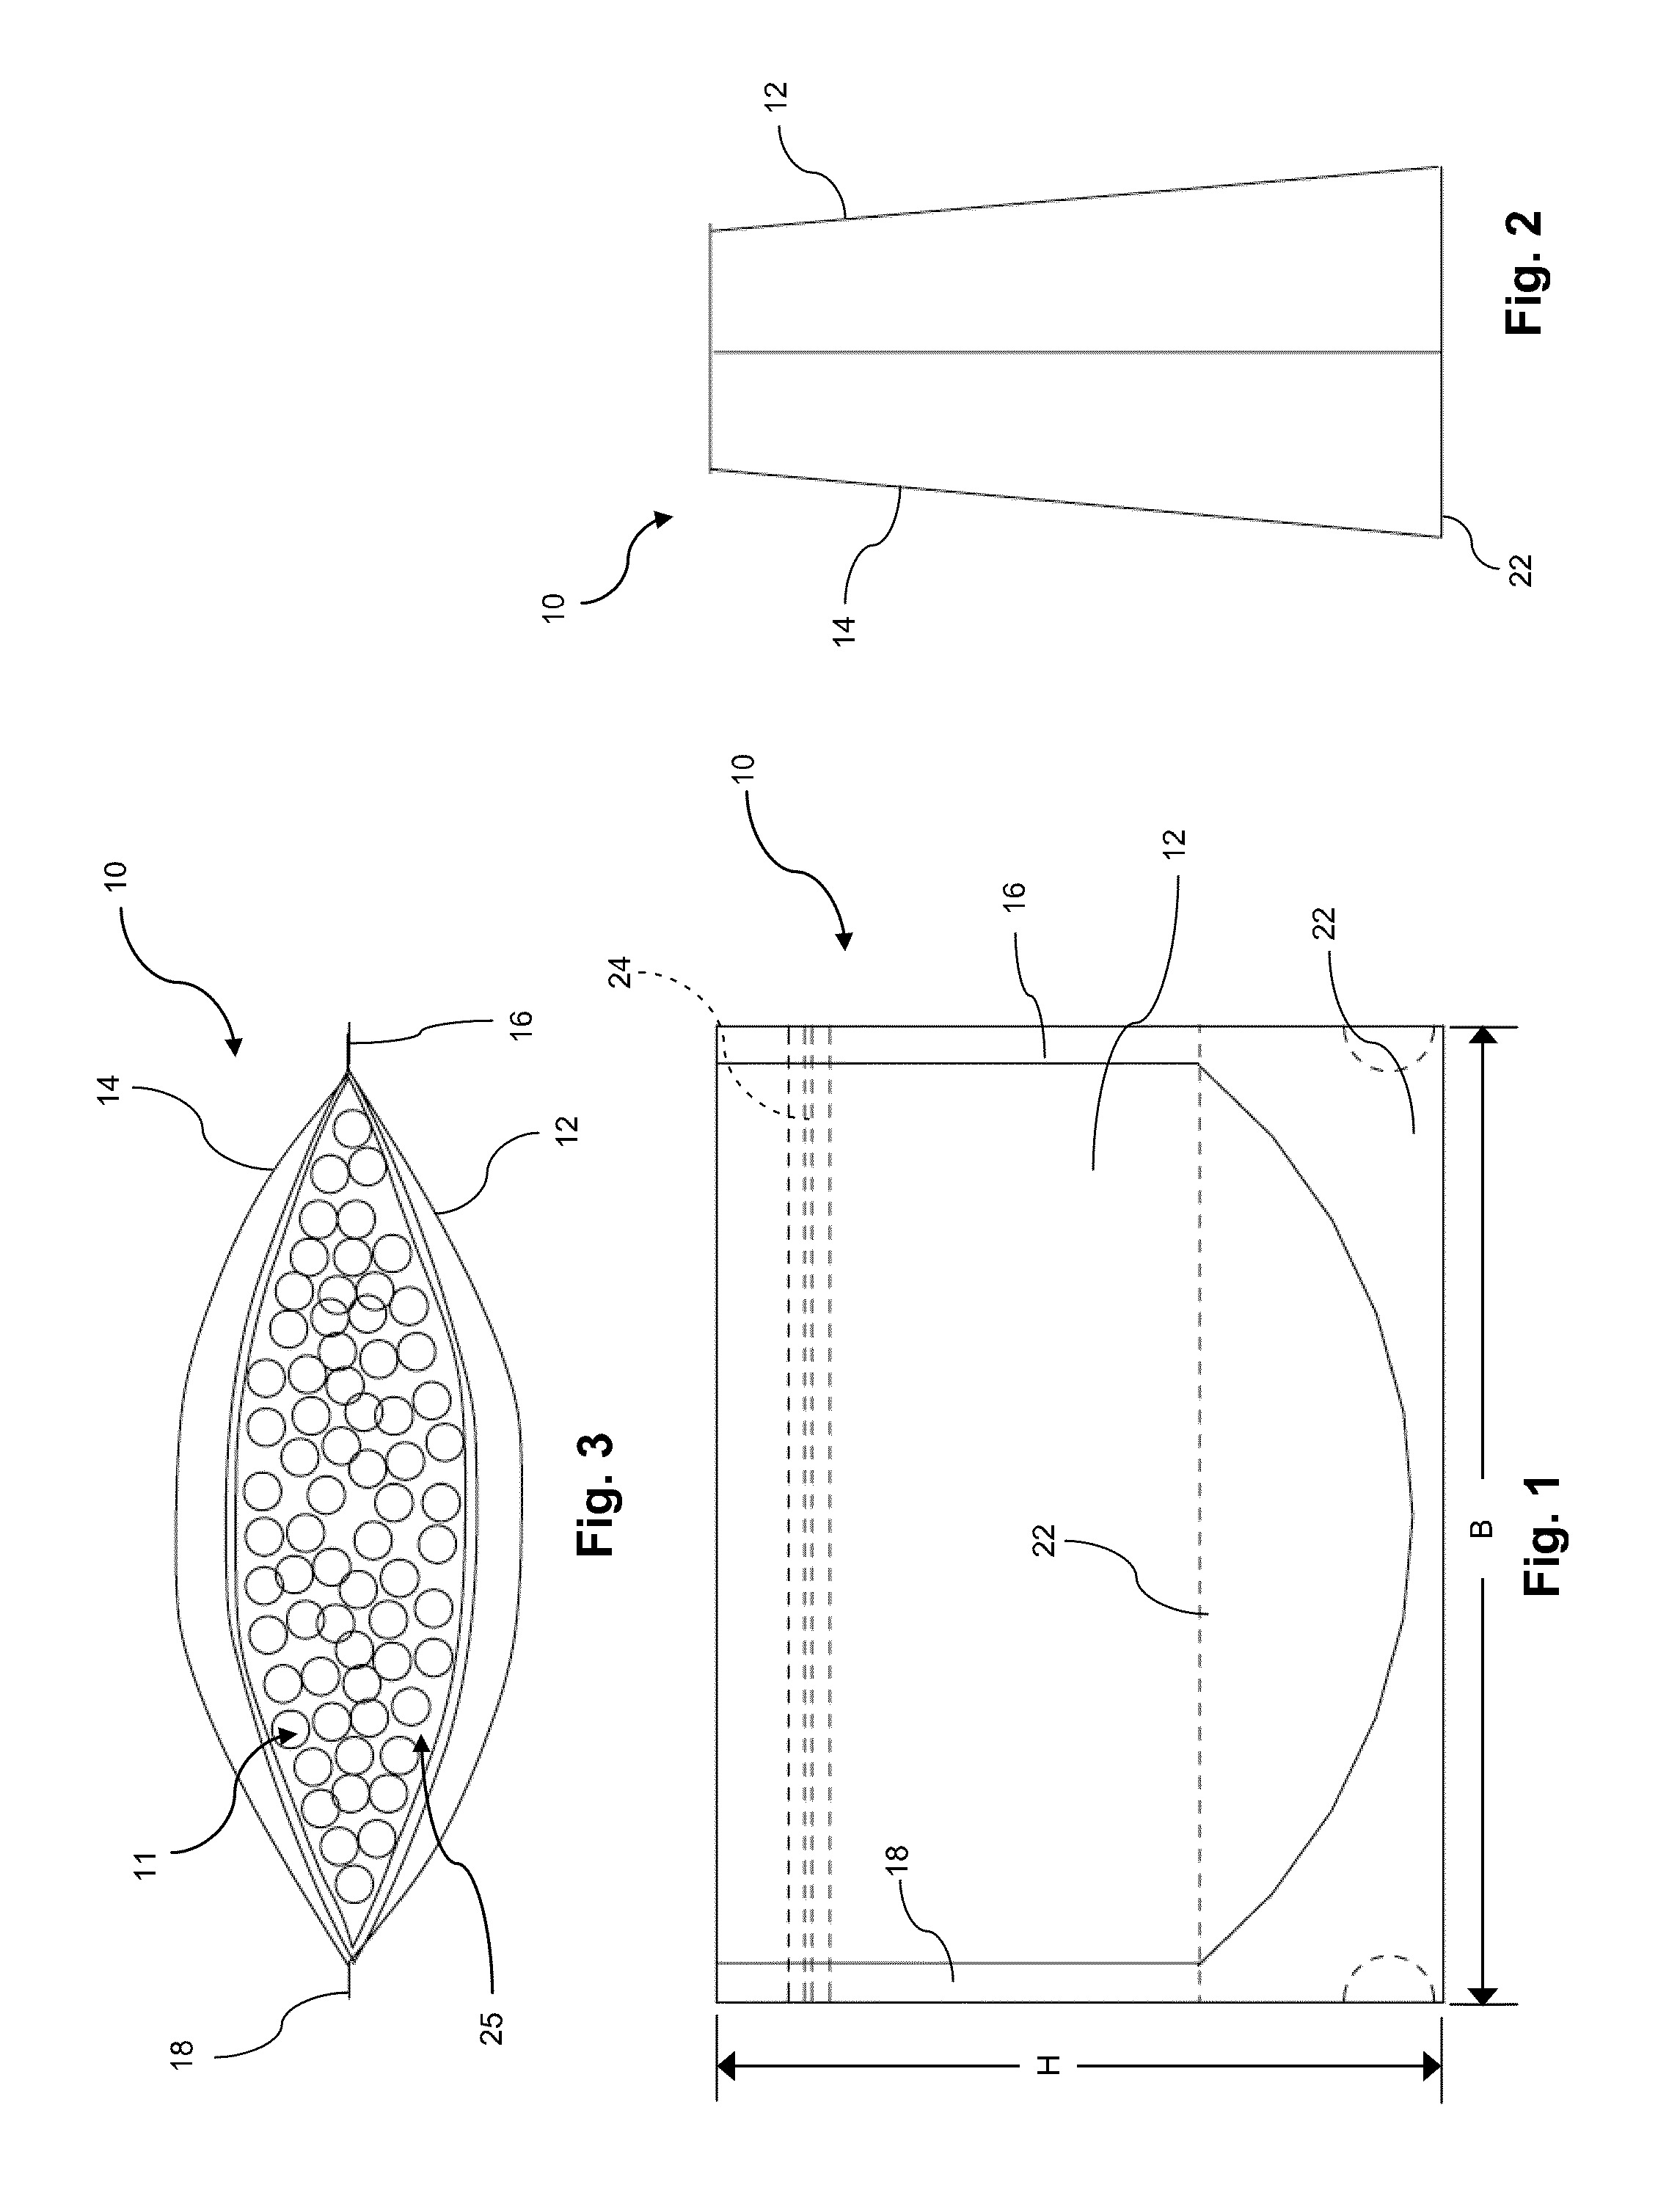 Flexible package and method of forming a cuff